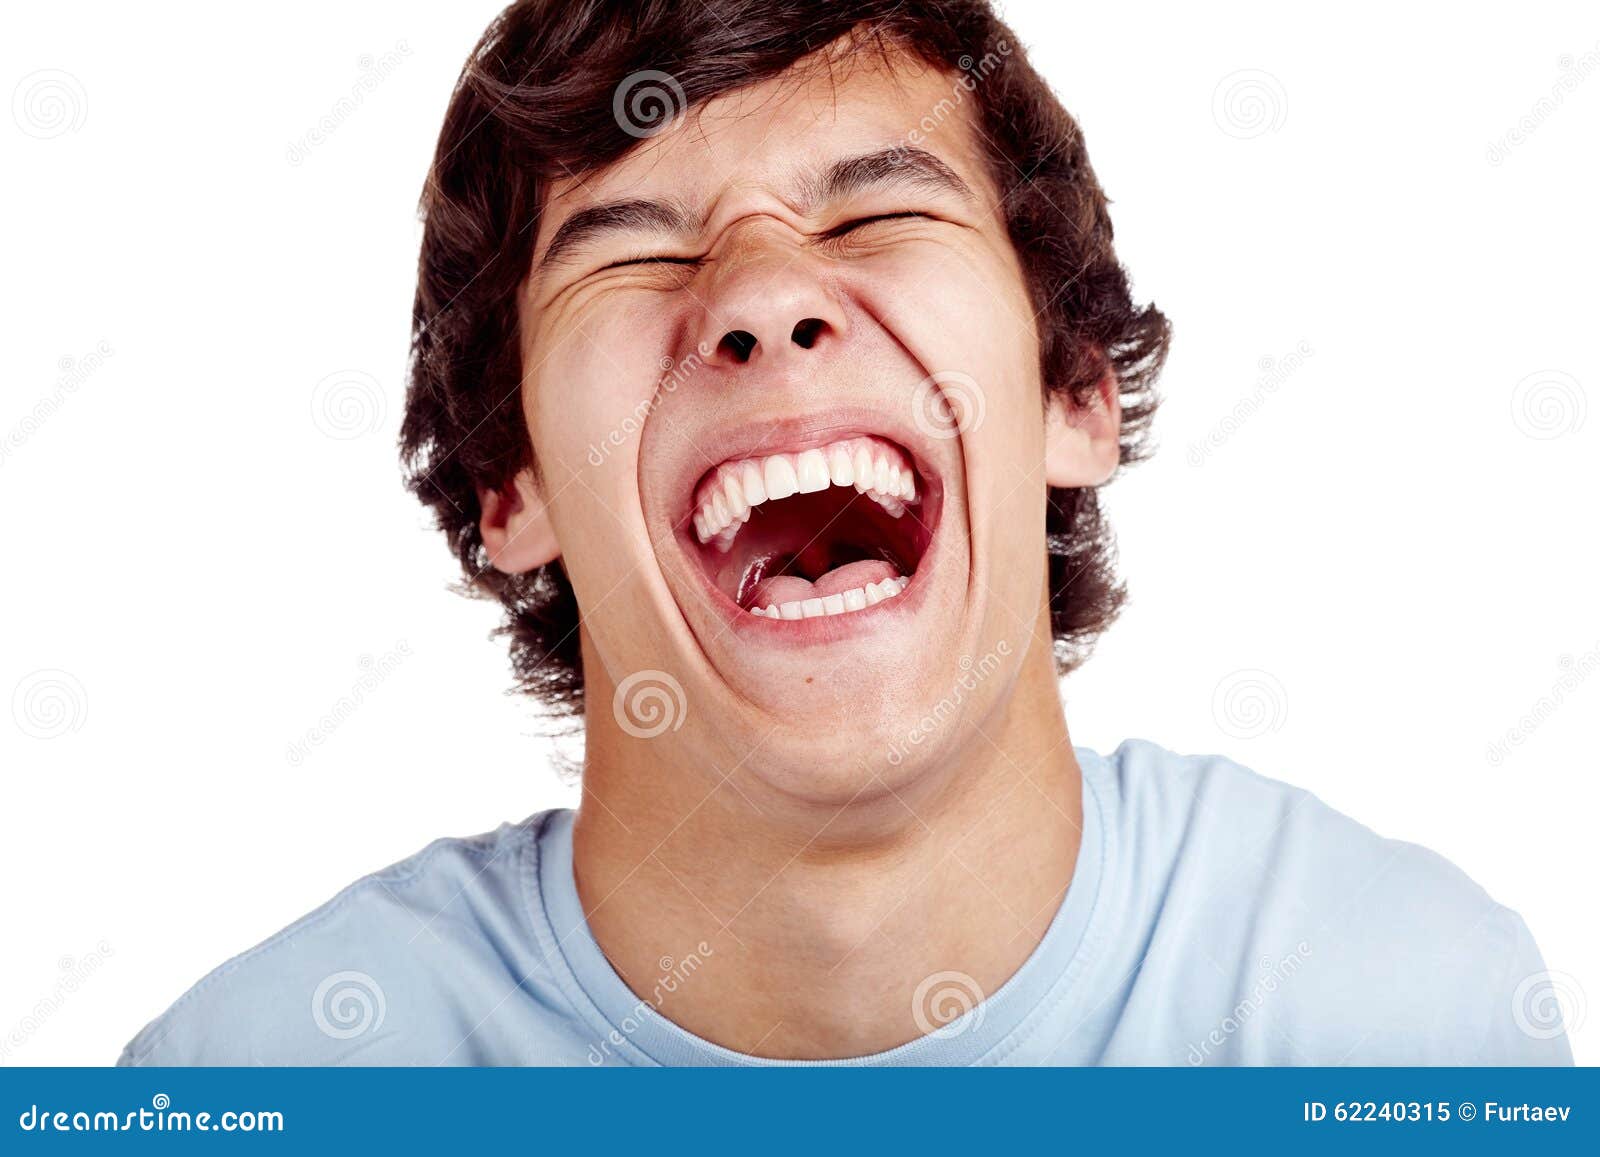 laughter-closeup-laughing-out-loud-young-man-face-concept-62240315.jpg